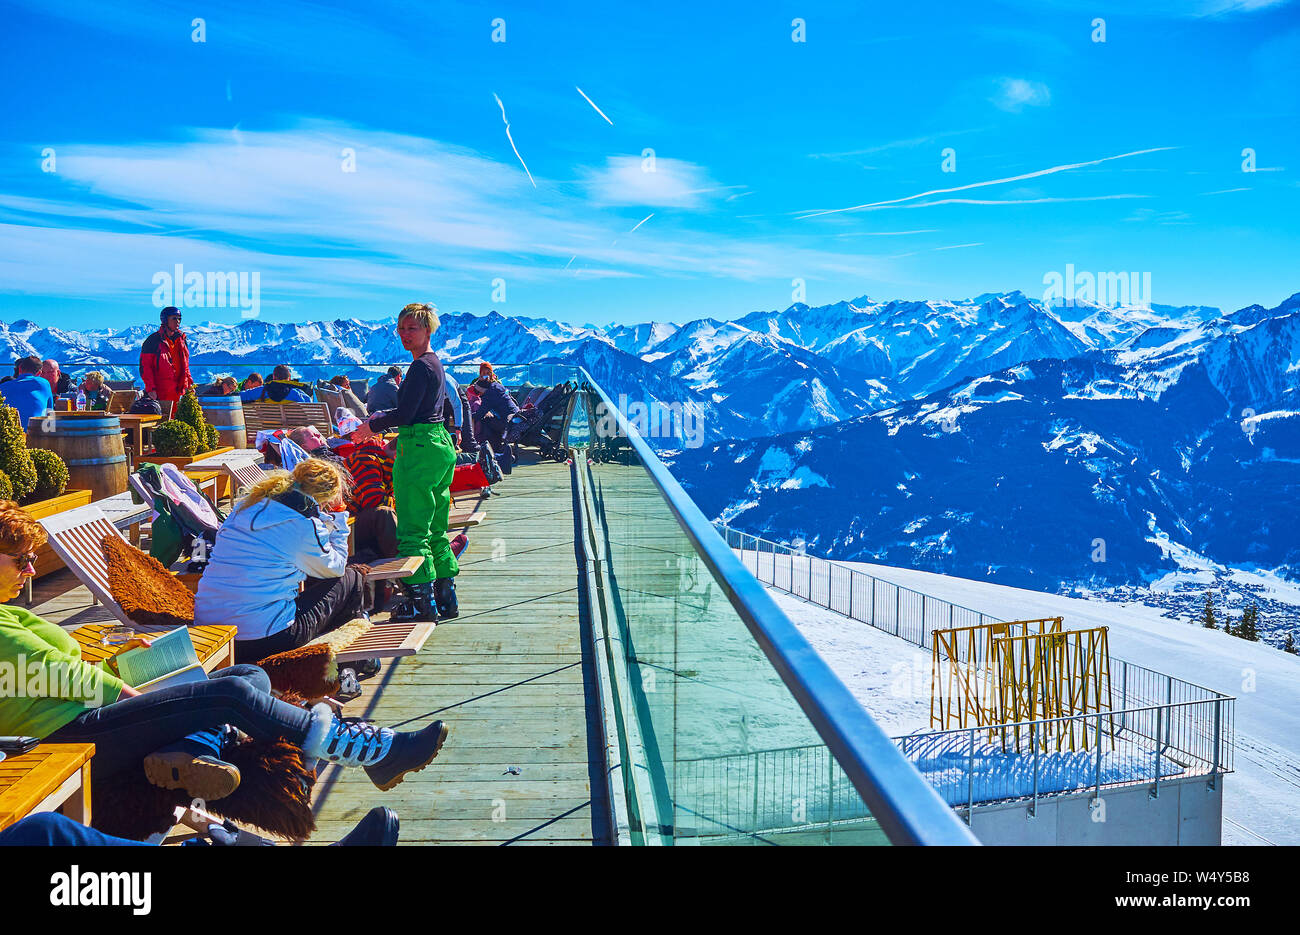 ZELL AM SEE, AUSTRIA - FEBRUARY 28, 2019: Crowded outdoor terrace of lounge Panorama restaurant on top of Schmitten mount with many sportsmen, relaxin Stock Photo